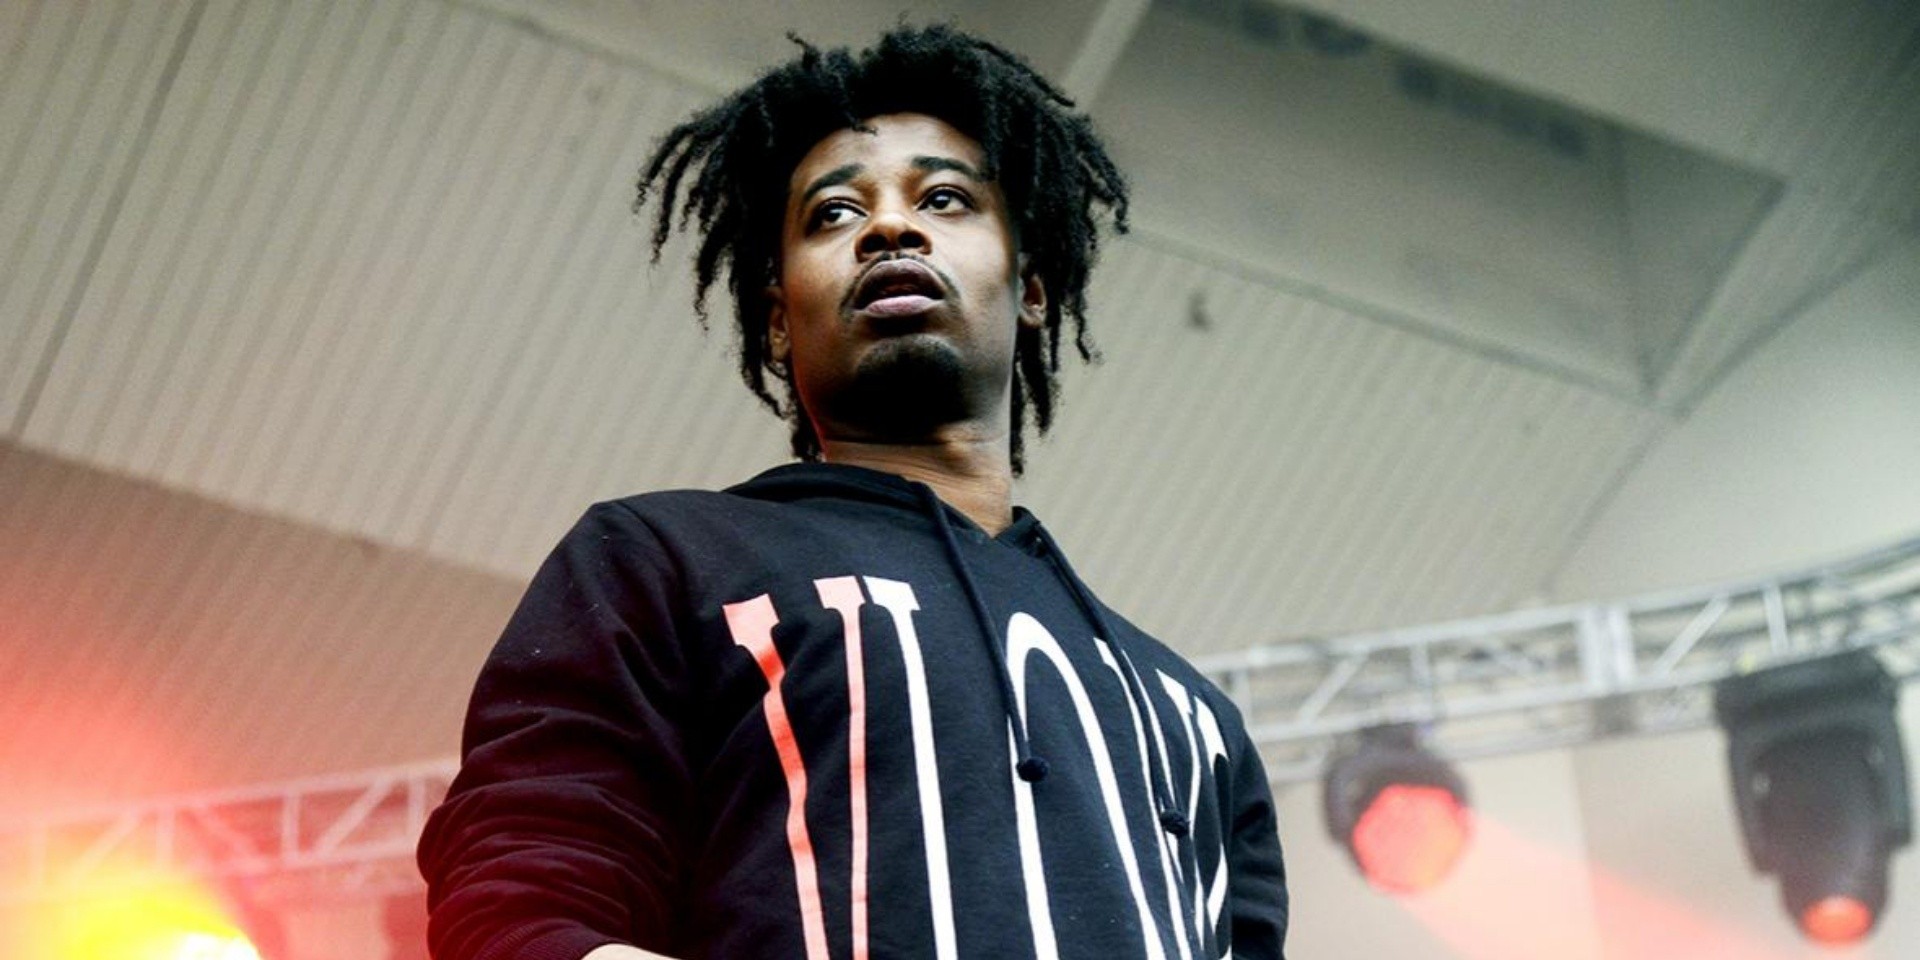 Danny Brown releases second single, 'Best Life', from upcoming album